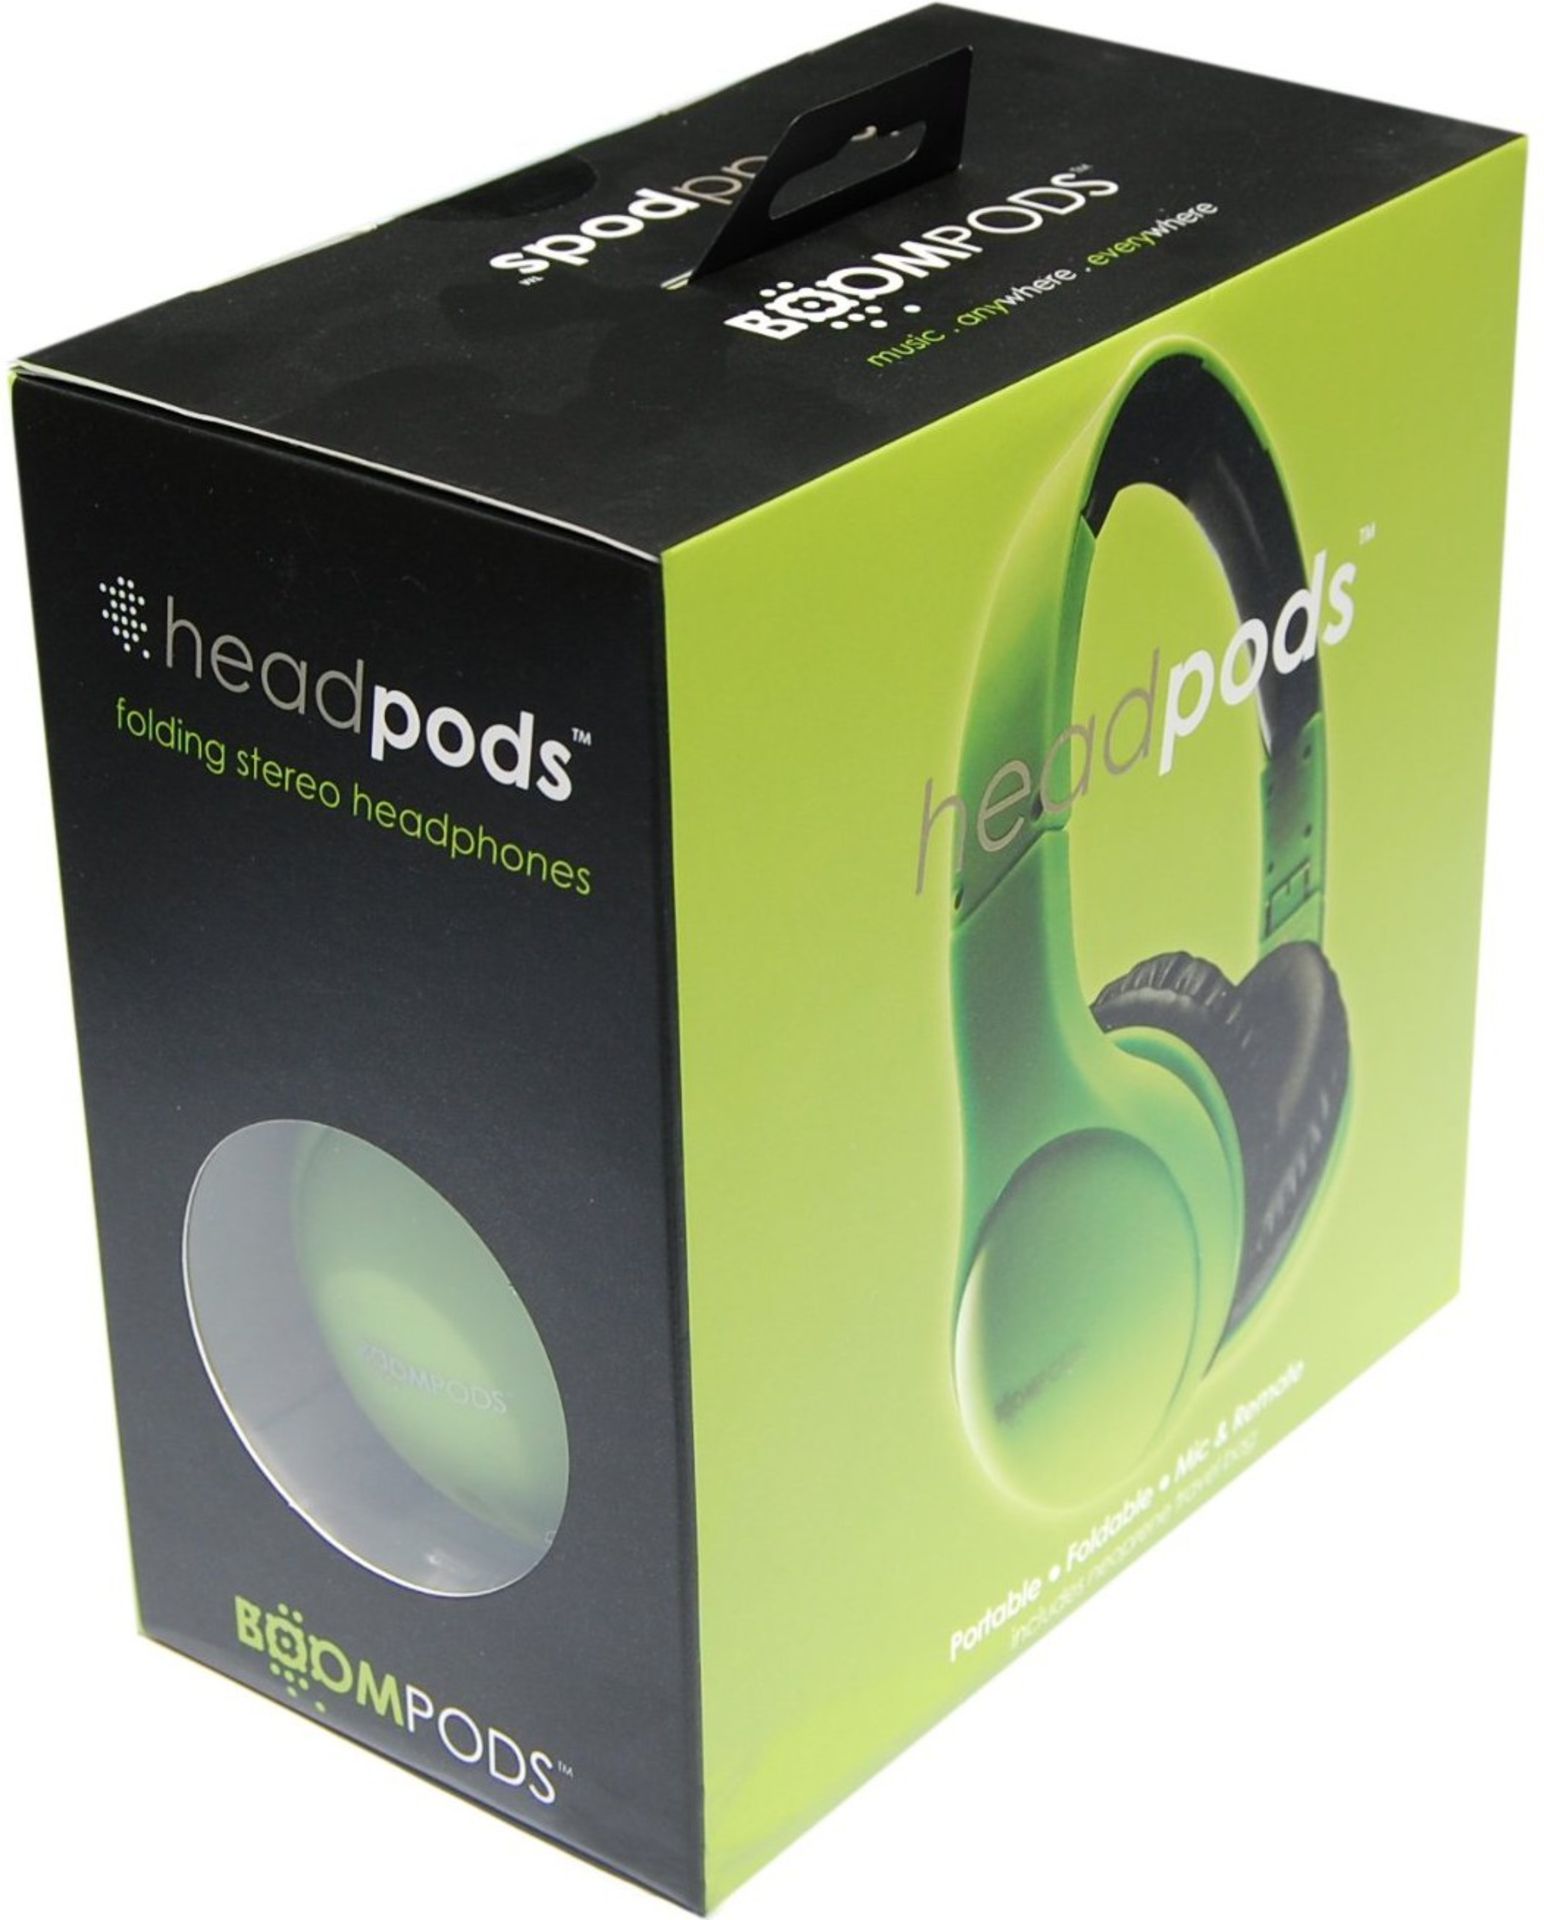 V *TRADE QTY* Brand New Boompods Headpods Foldable Soft Touch Headphones In Green Includes iPhone - Image 2 of 2